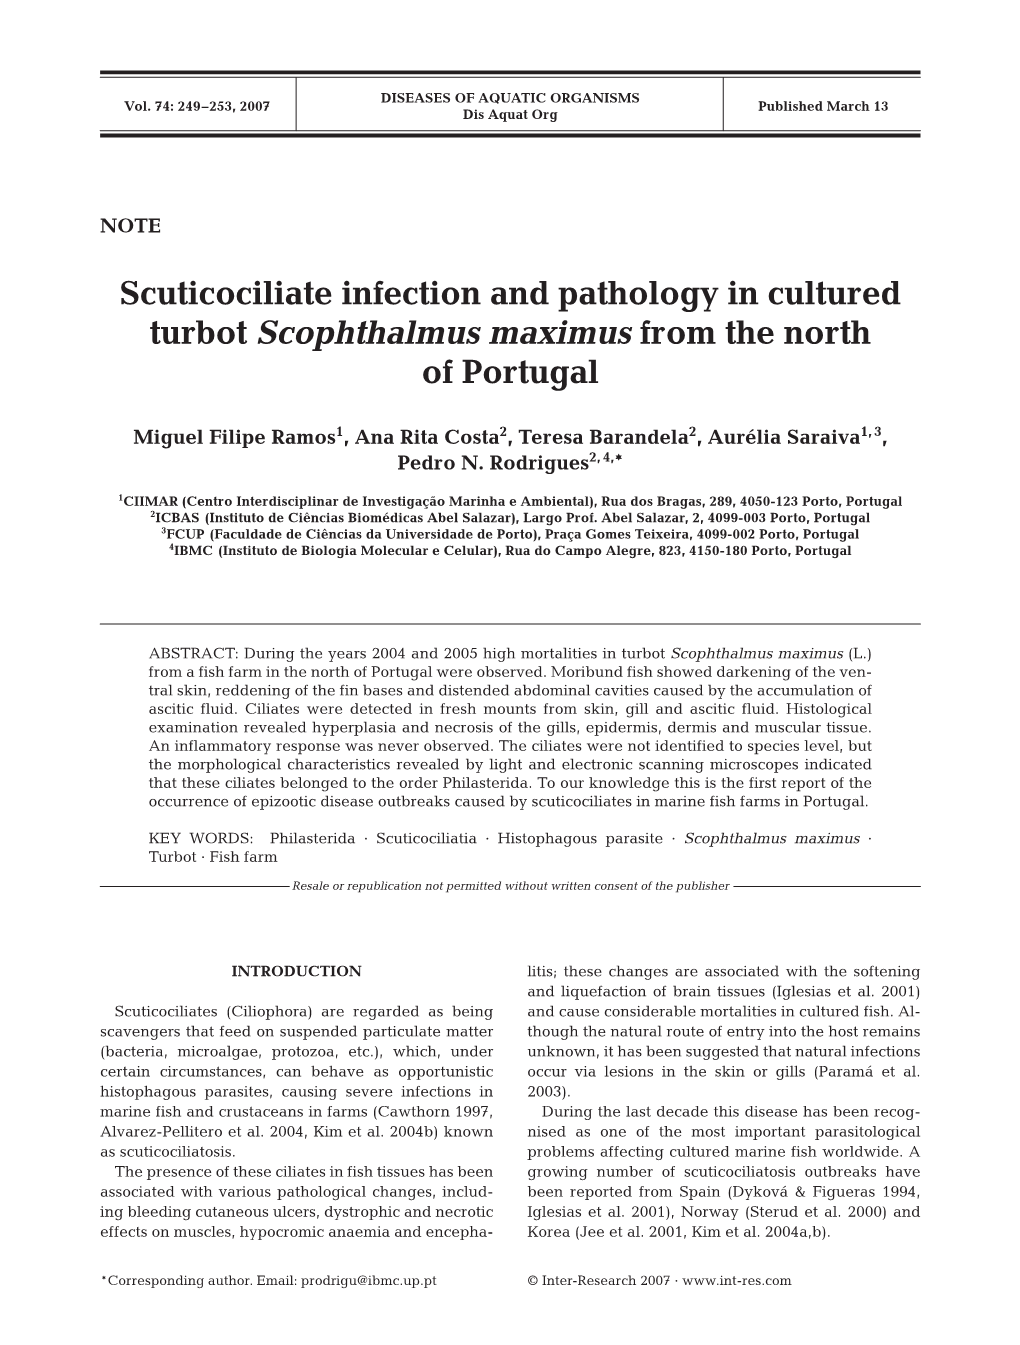 Scuticociliate Infection and Pathology in Cultured Turbot Scophthalmus Maximus from the North of Portugal